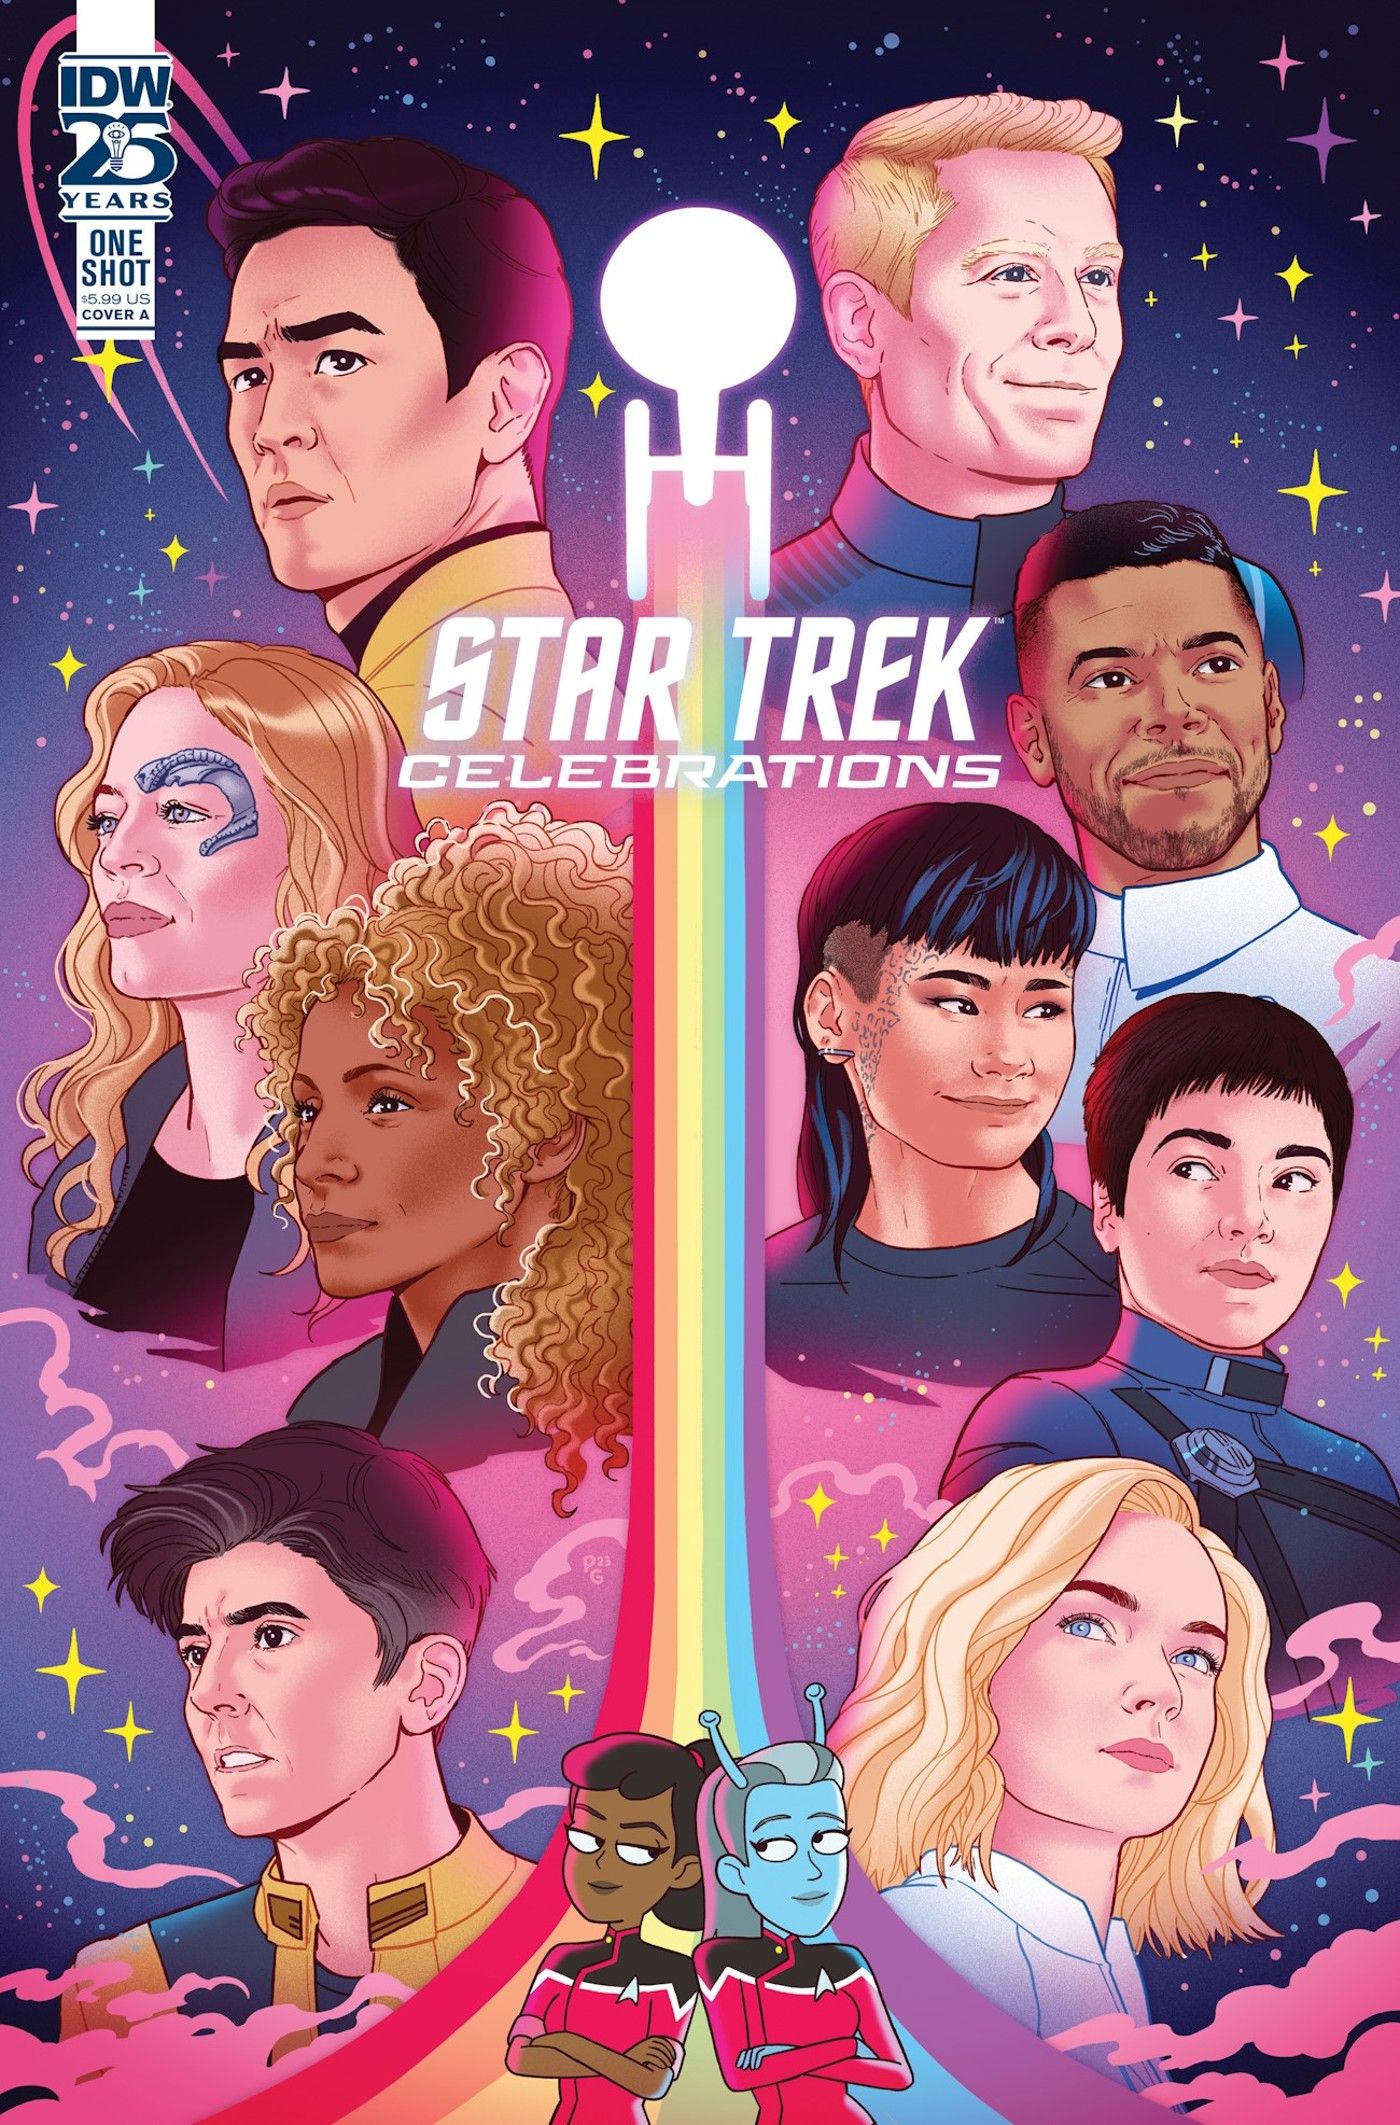 Art featuring the various LGBTQIA+ characters of Star Trek, including Seven of Nine, Rafifi and Paul Stamets